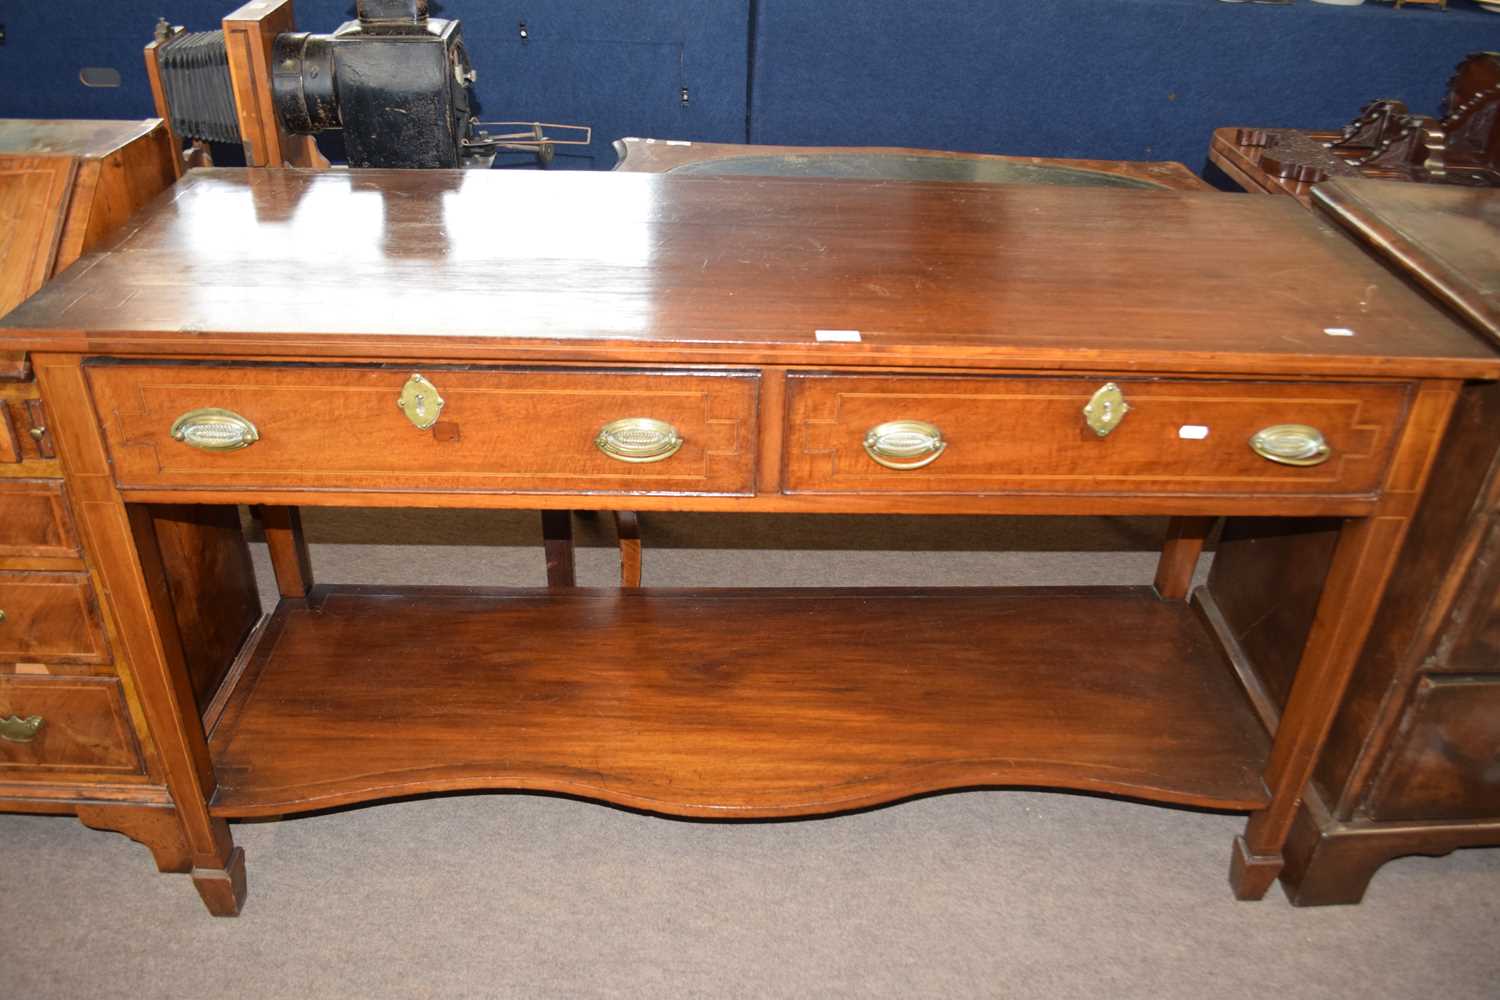 An Edwardian mahogany side table with two frieze drawers and tapering square legs with a